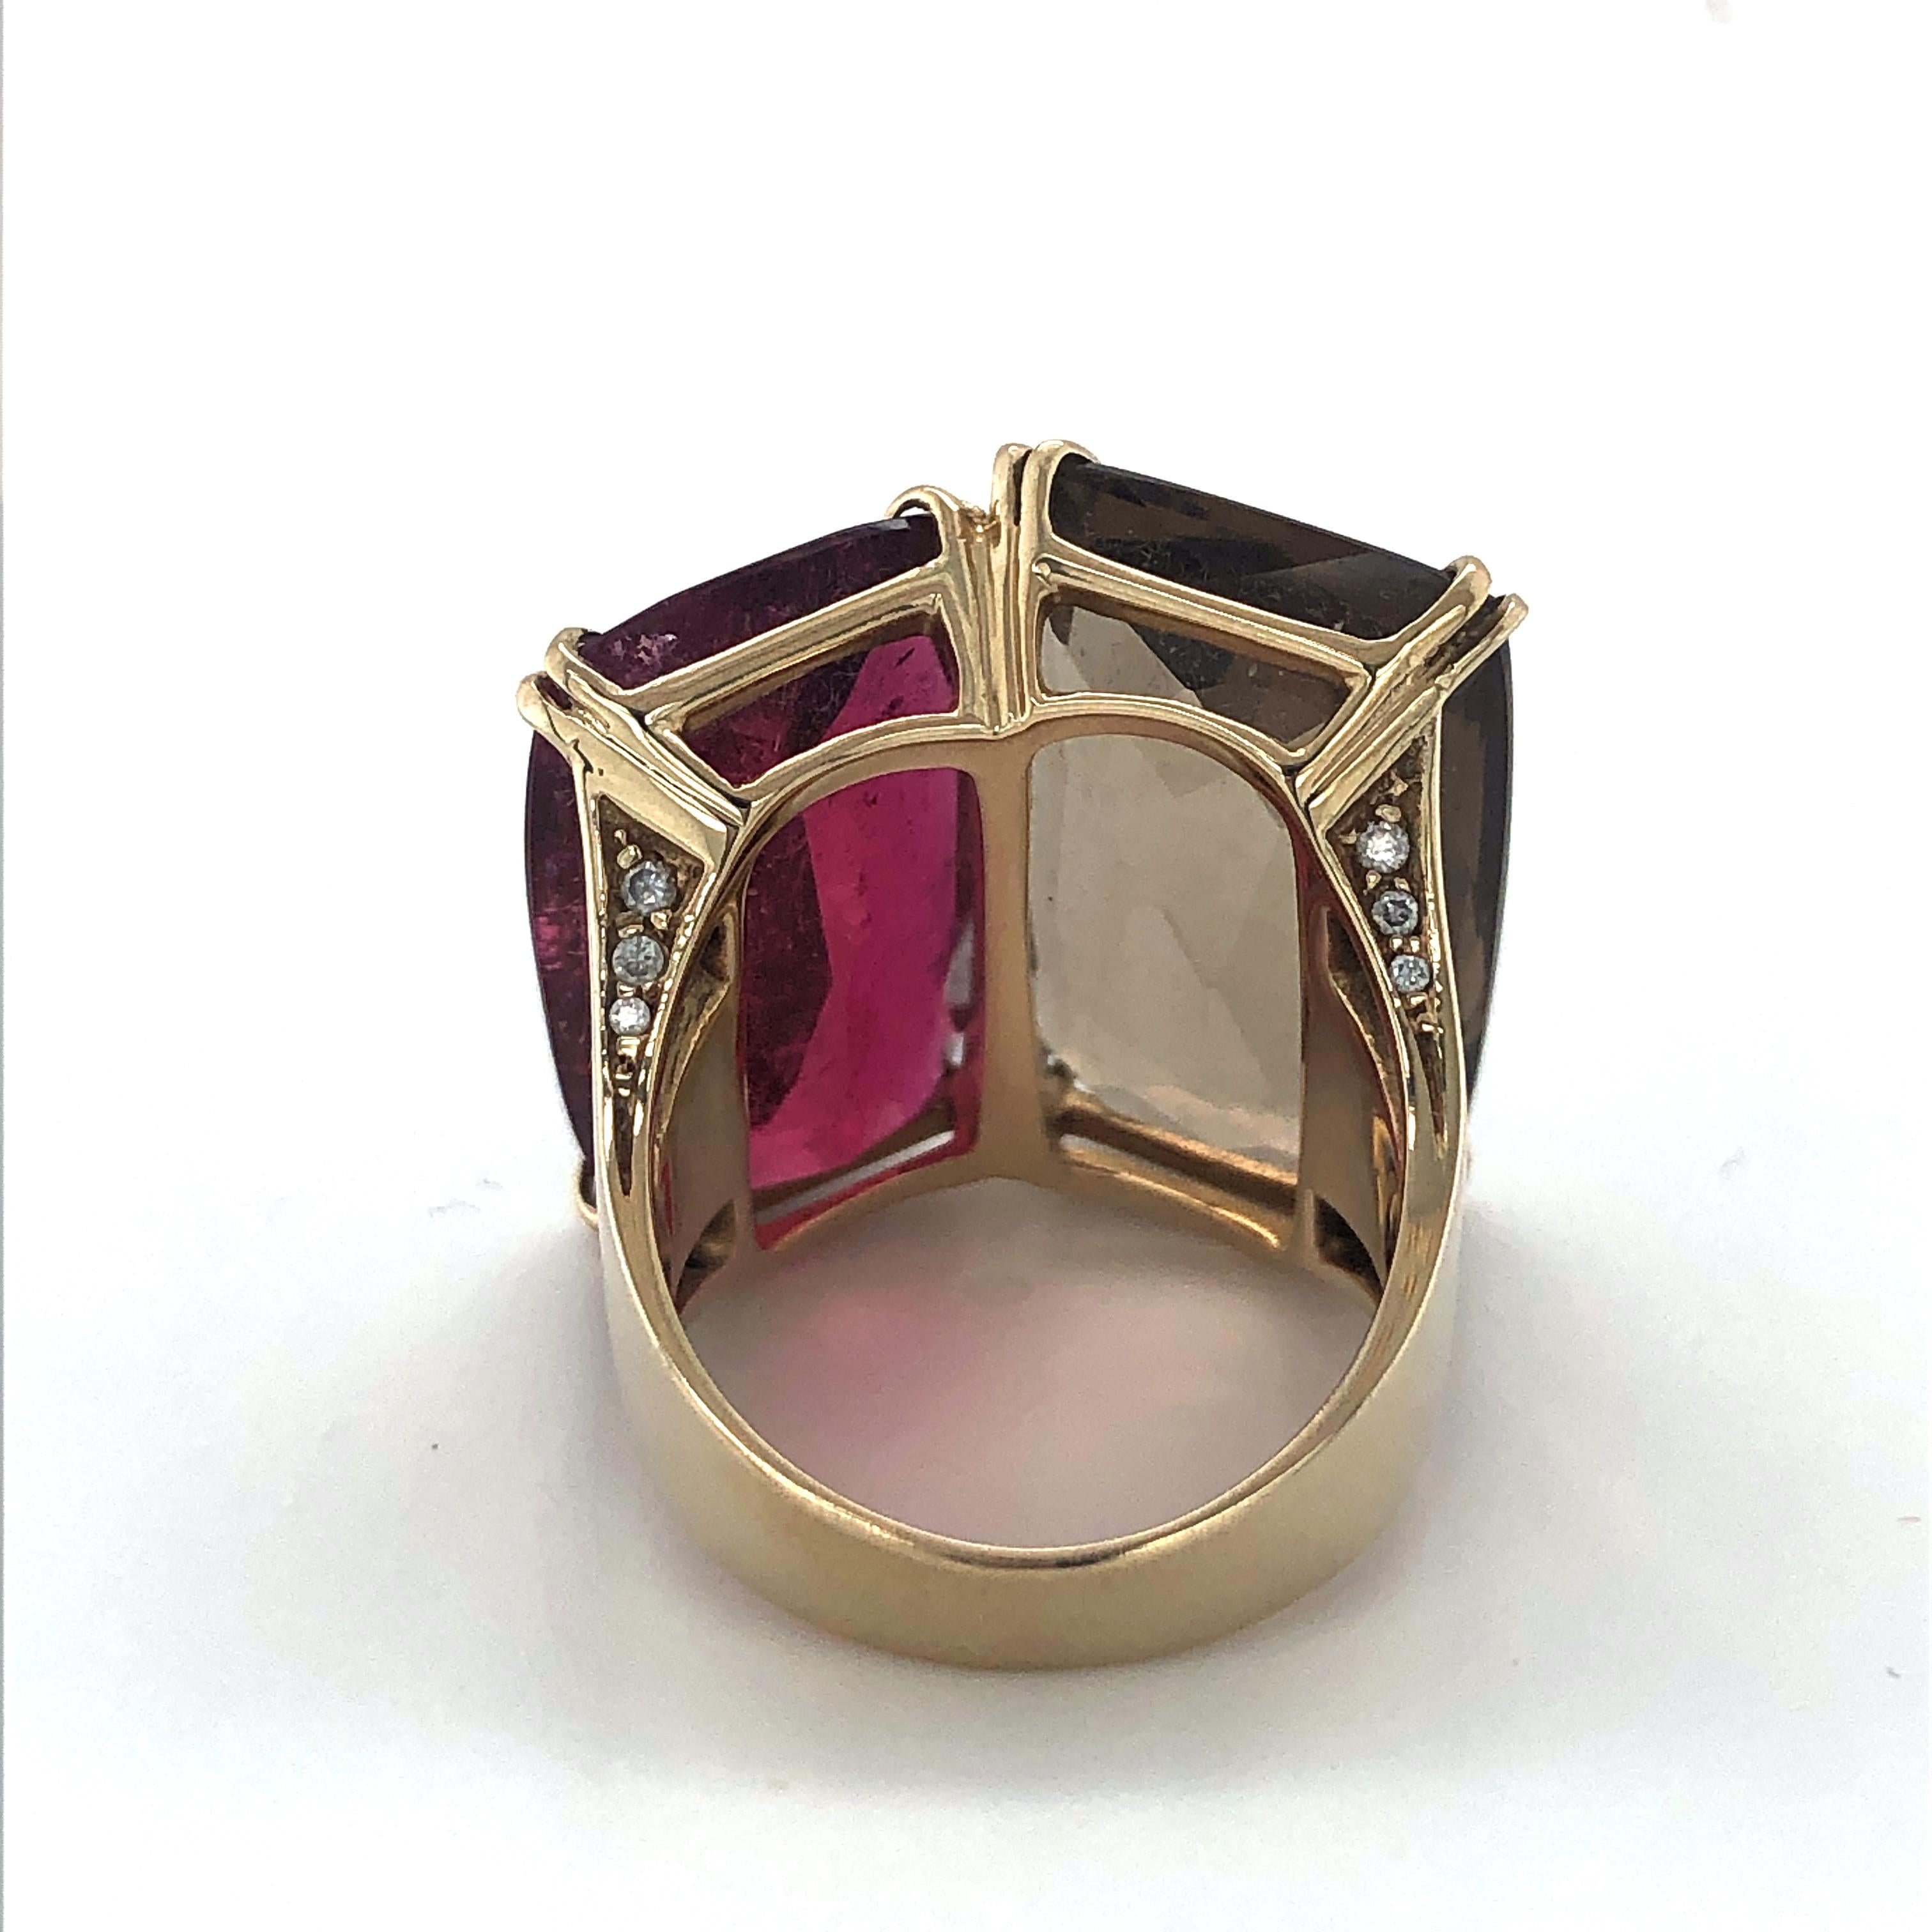 Cushion Cut H.Stern Ring with Tourmaline and Smoky Quartz in Yellowgold 750